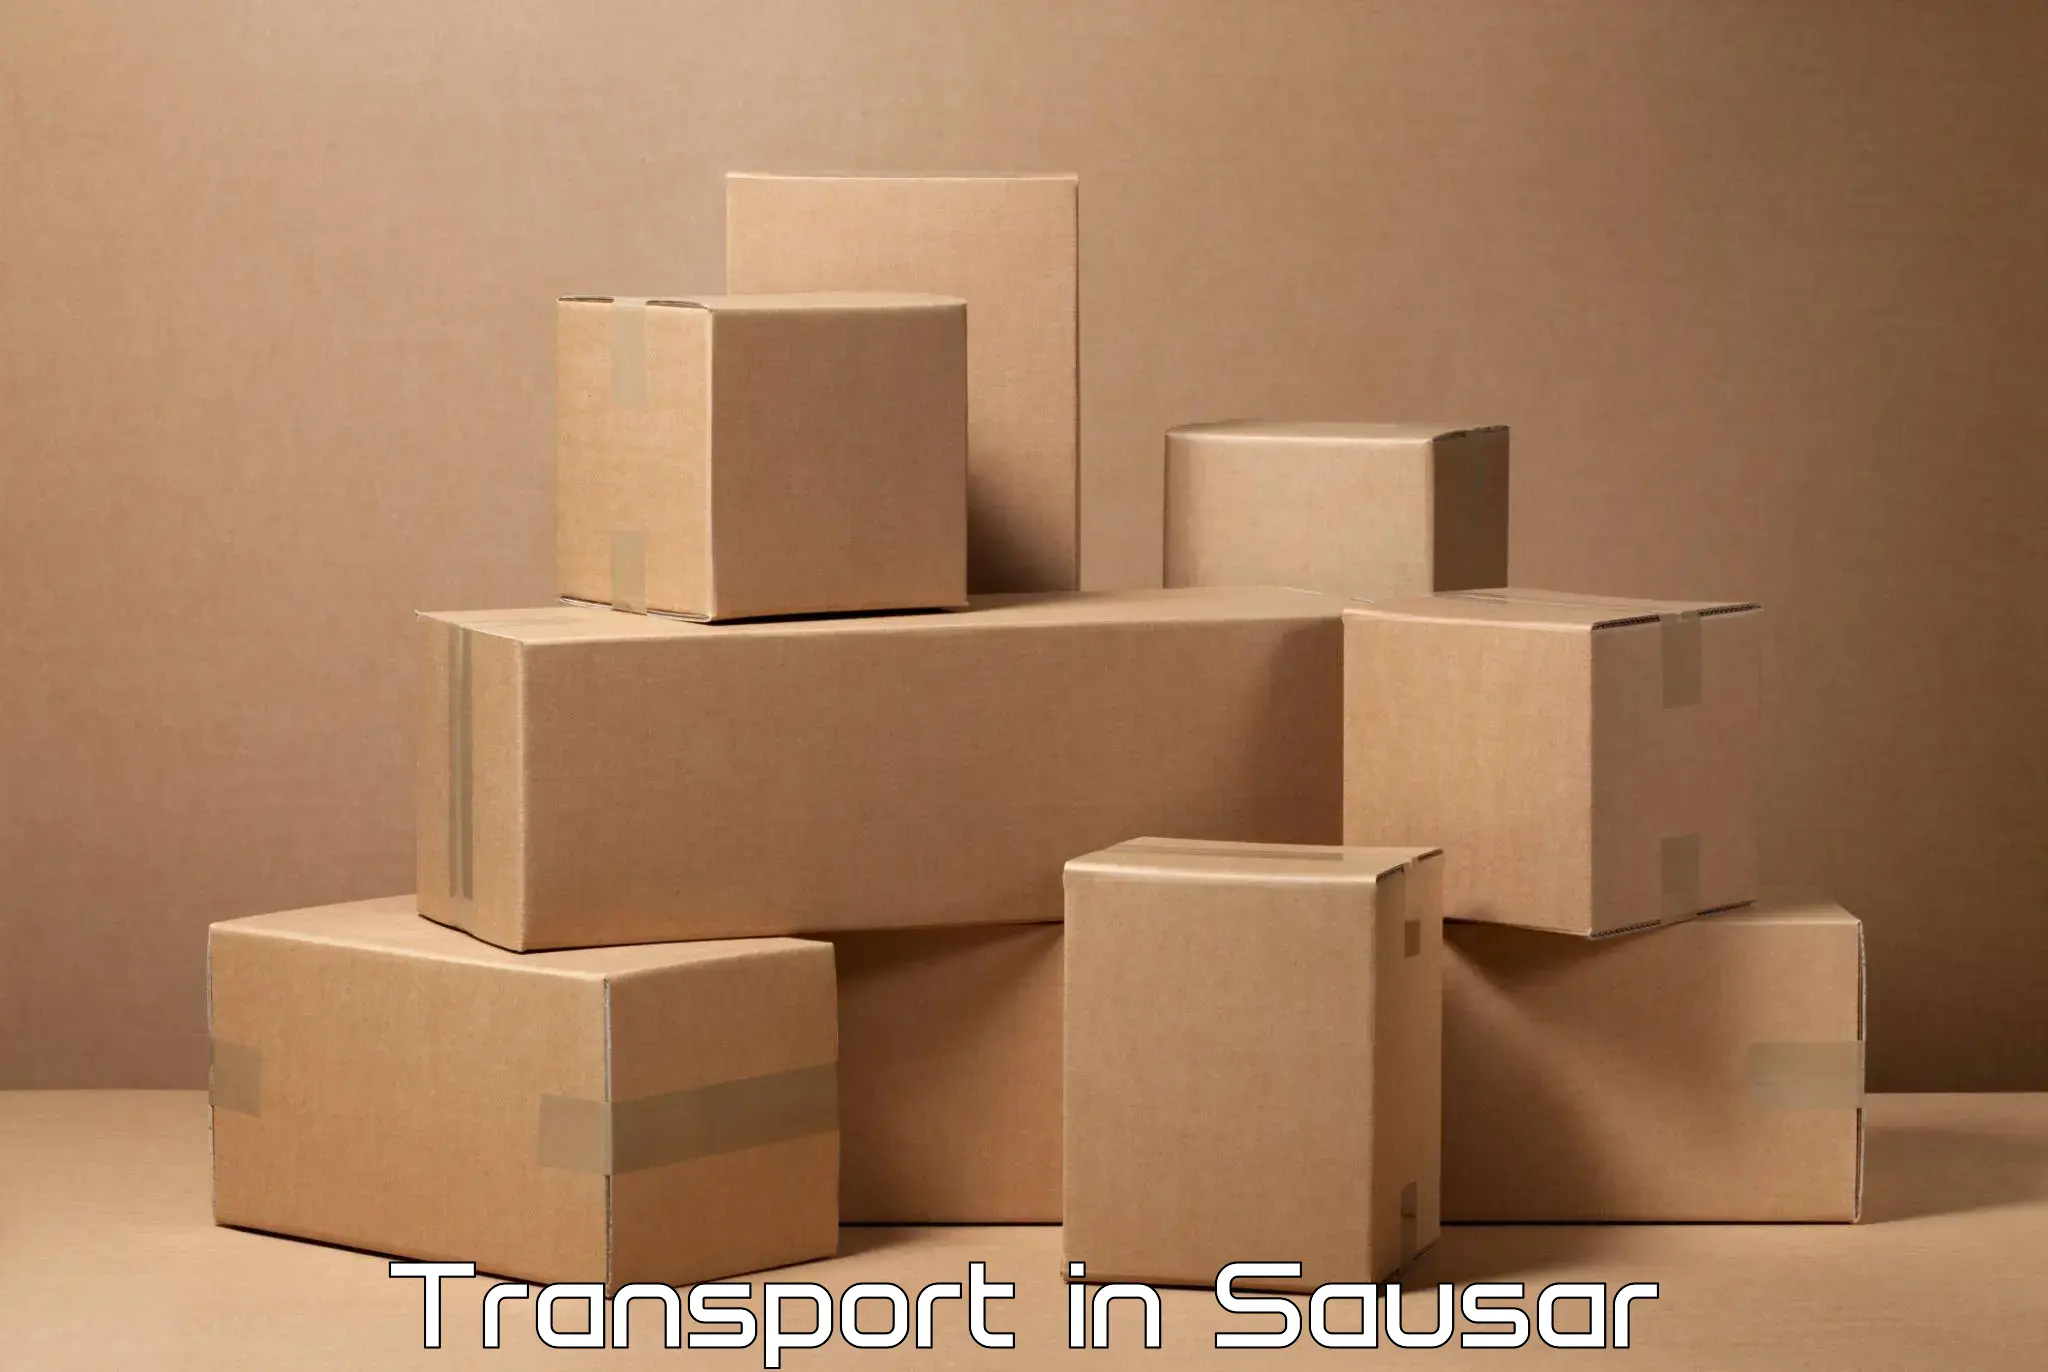 Transport in sharing in Sausar